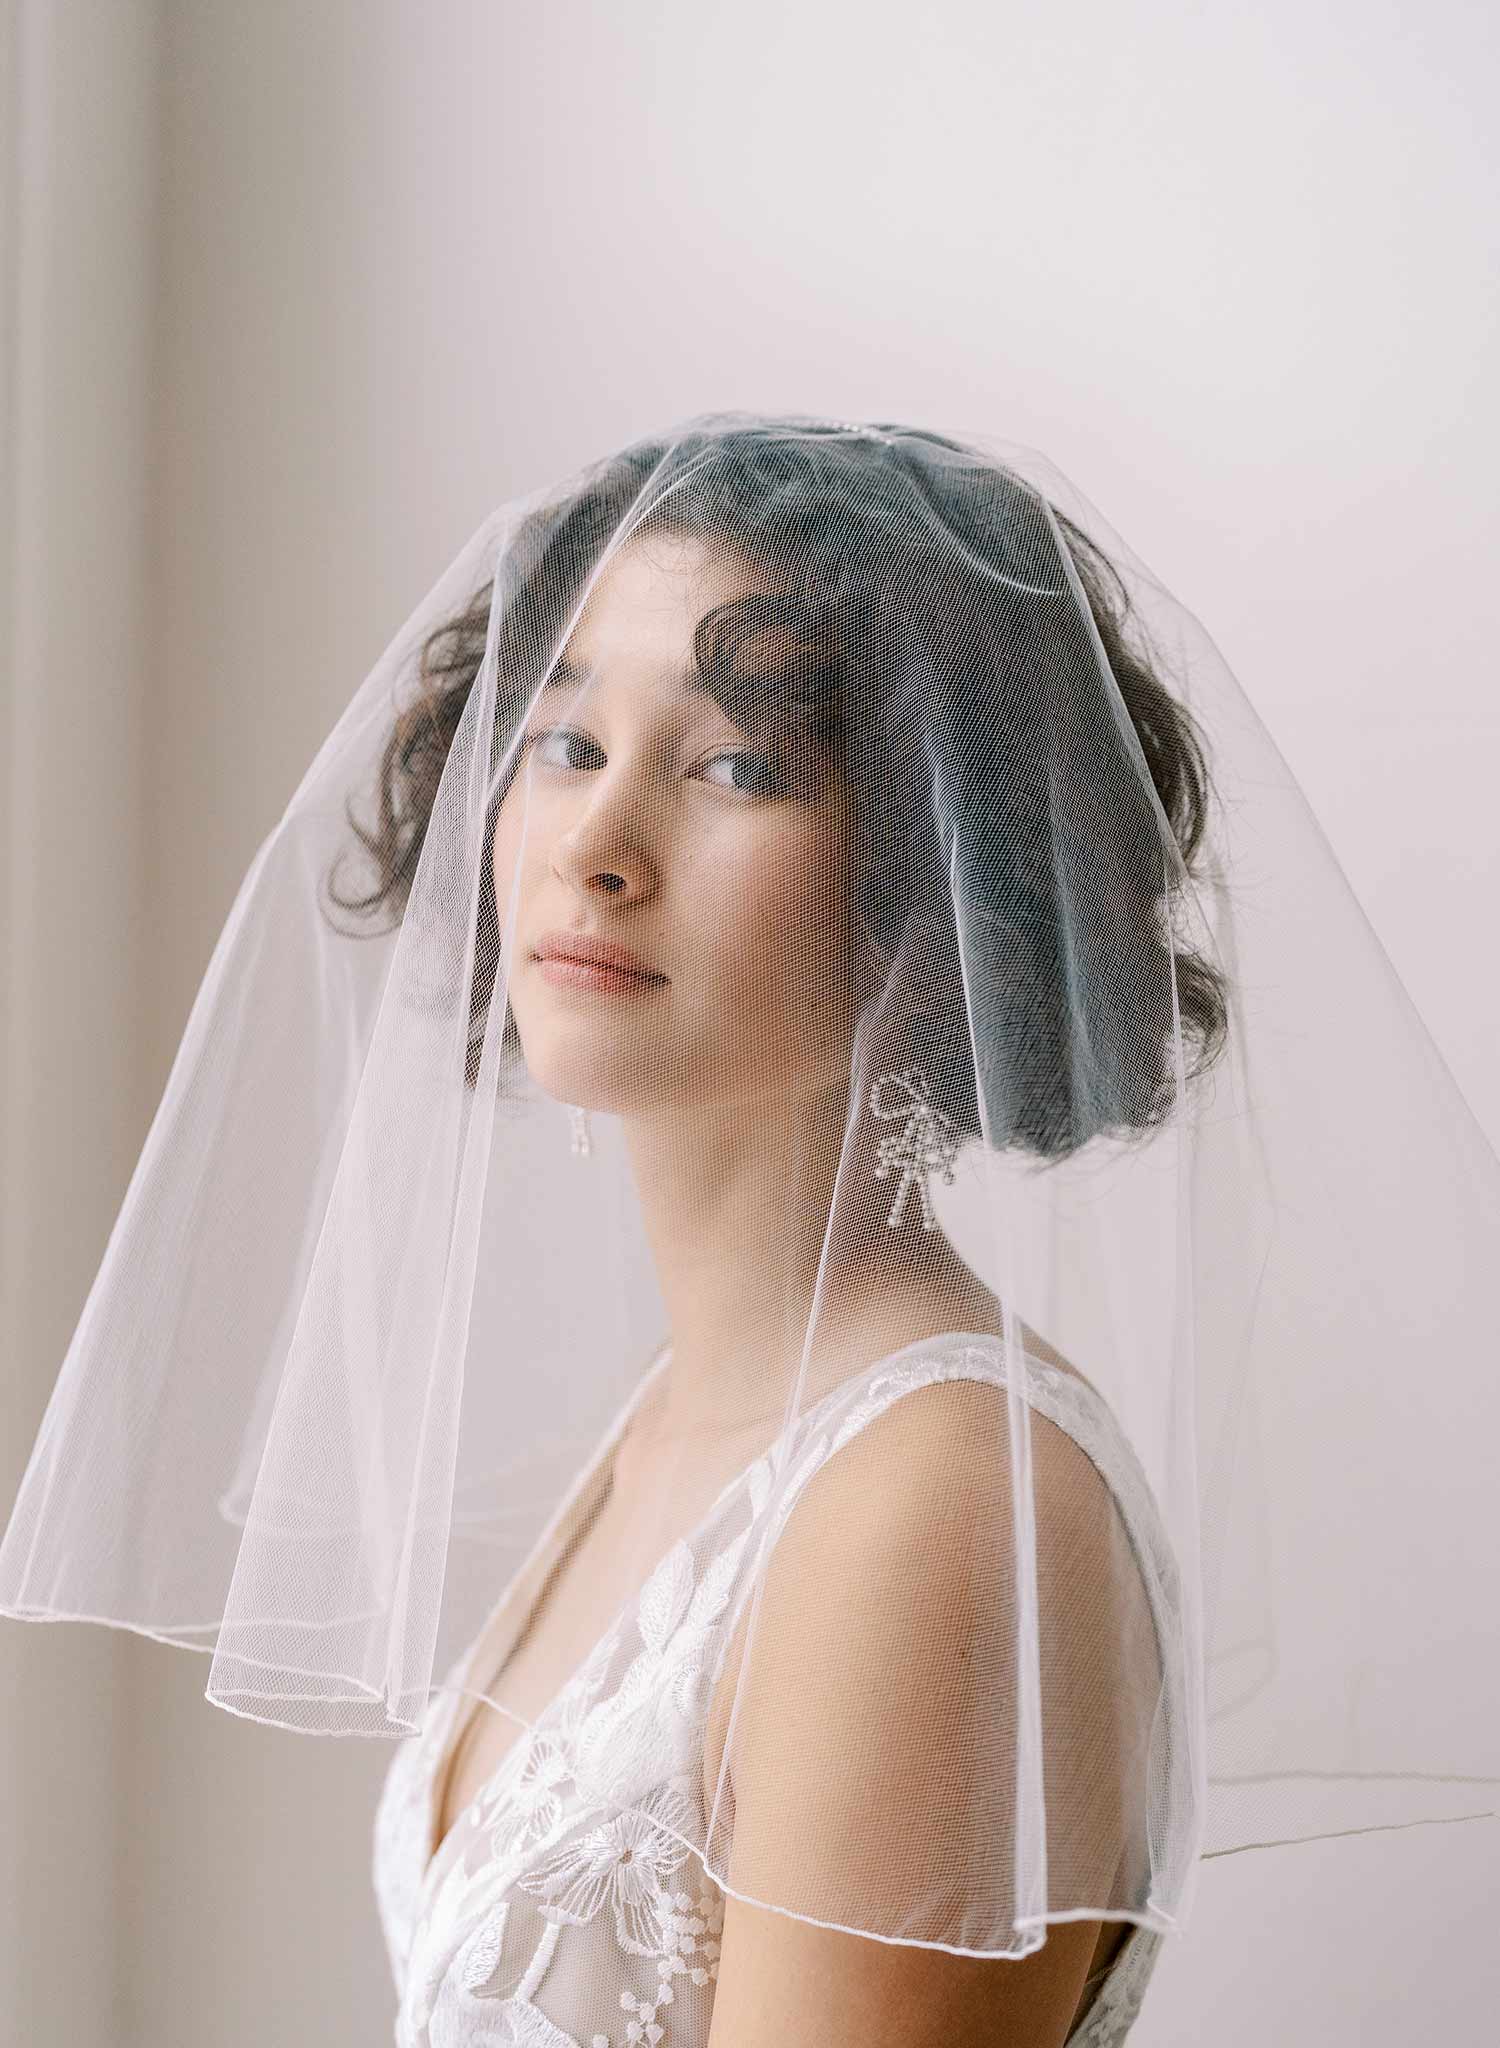 What Is A Wedding Veil Blusher?